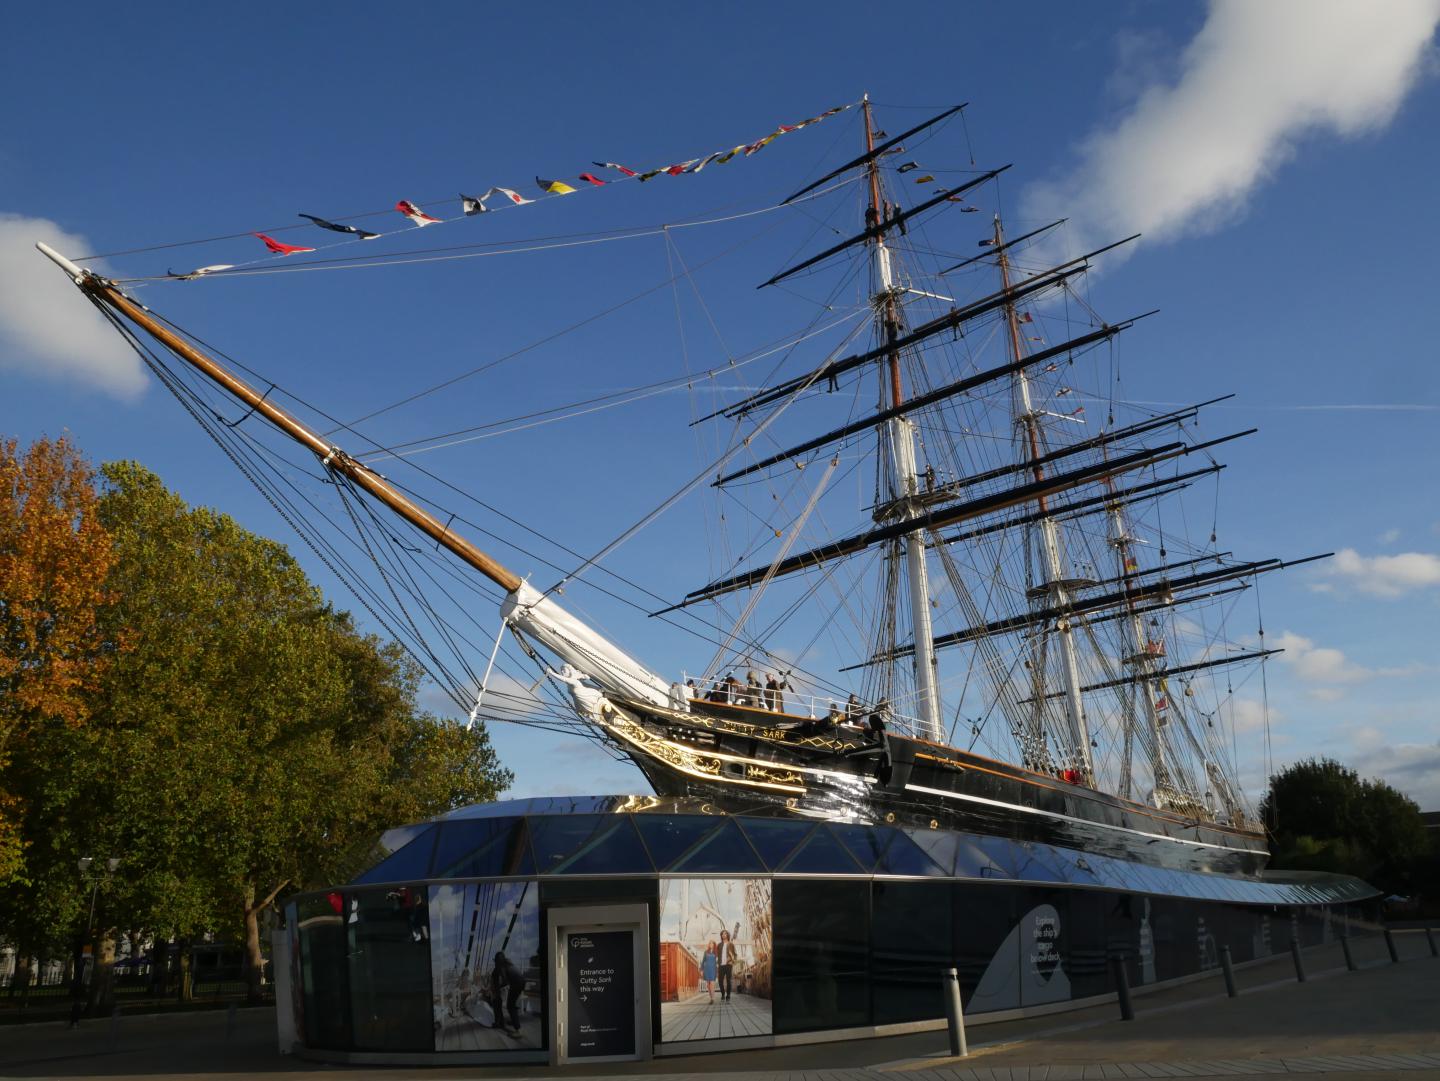 Cutty Sark with bunting